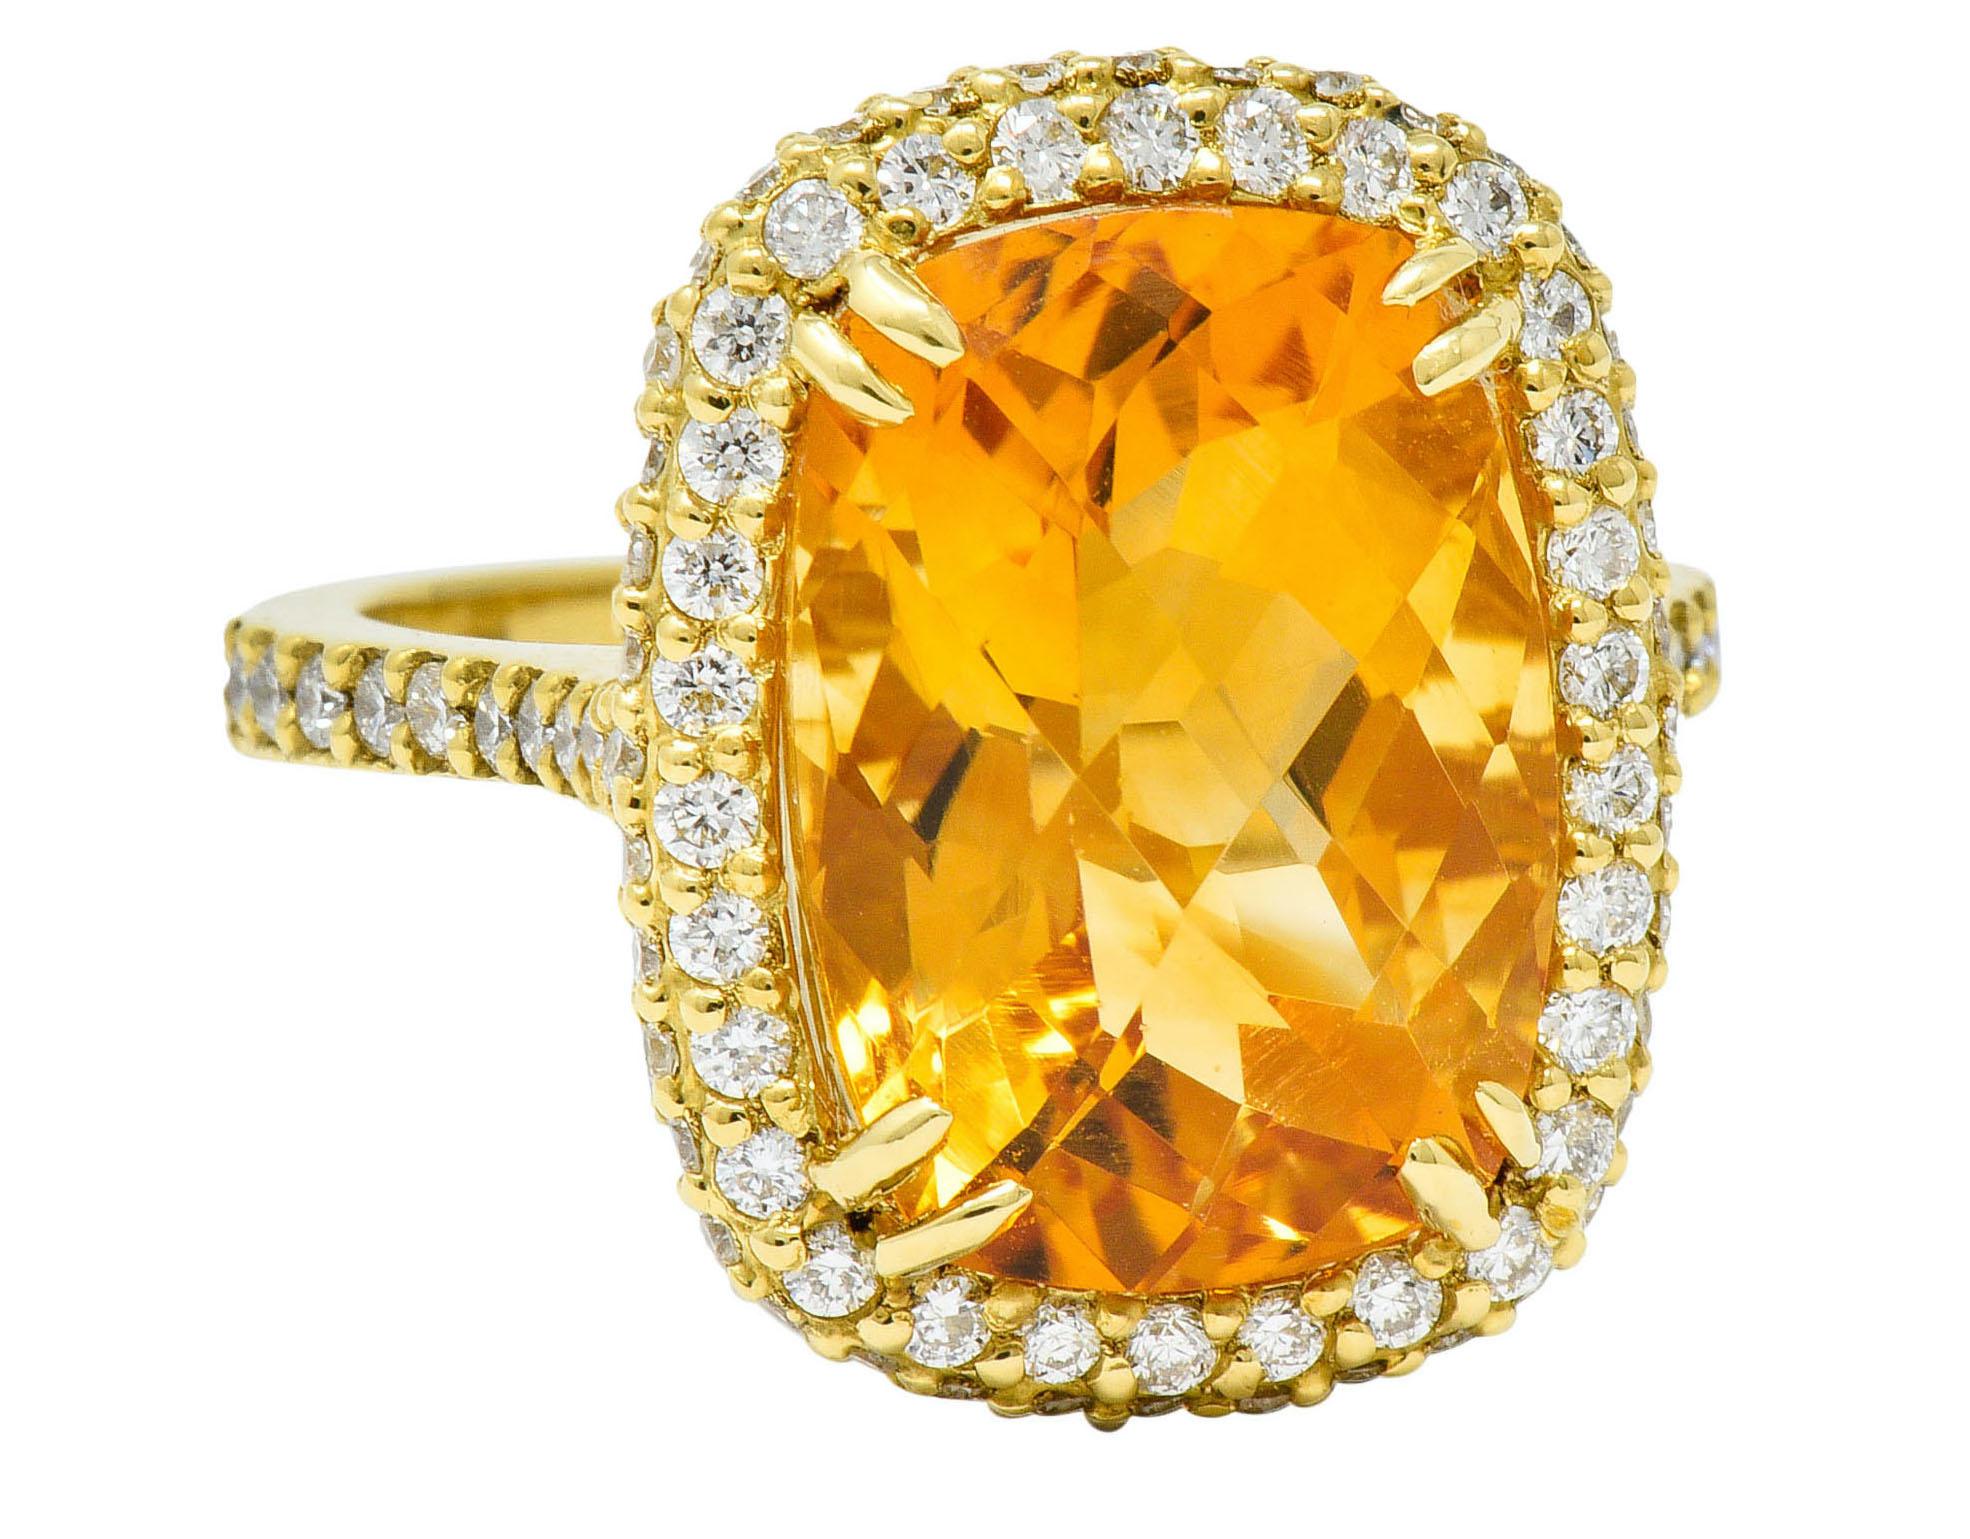 Centering a rectangular checkerboard cut citrine measuring approximately 14.0 x 10.0 mm

A saturated yellowish-orange color and set with split prongs in a stylized floral basket

Surrounded by a round brilliant cut diamond pavè halo and shoulders,